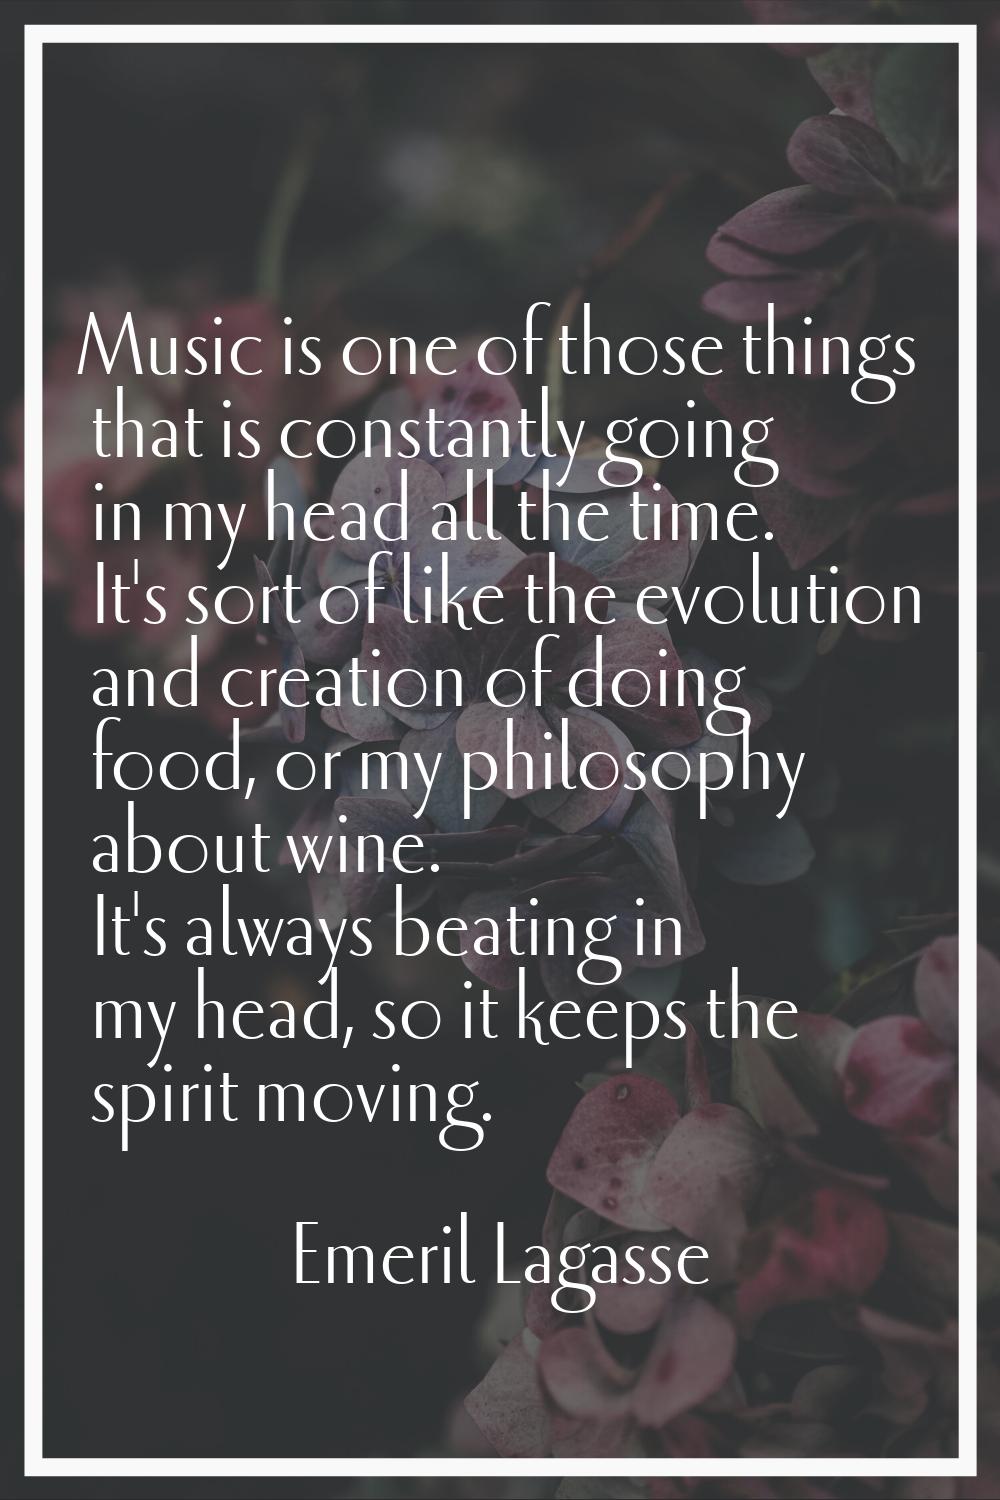 Music is one of those things that is constantly going in my head all the time. It's sort of like th